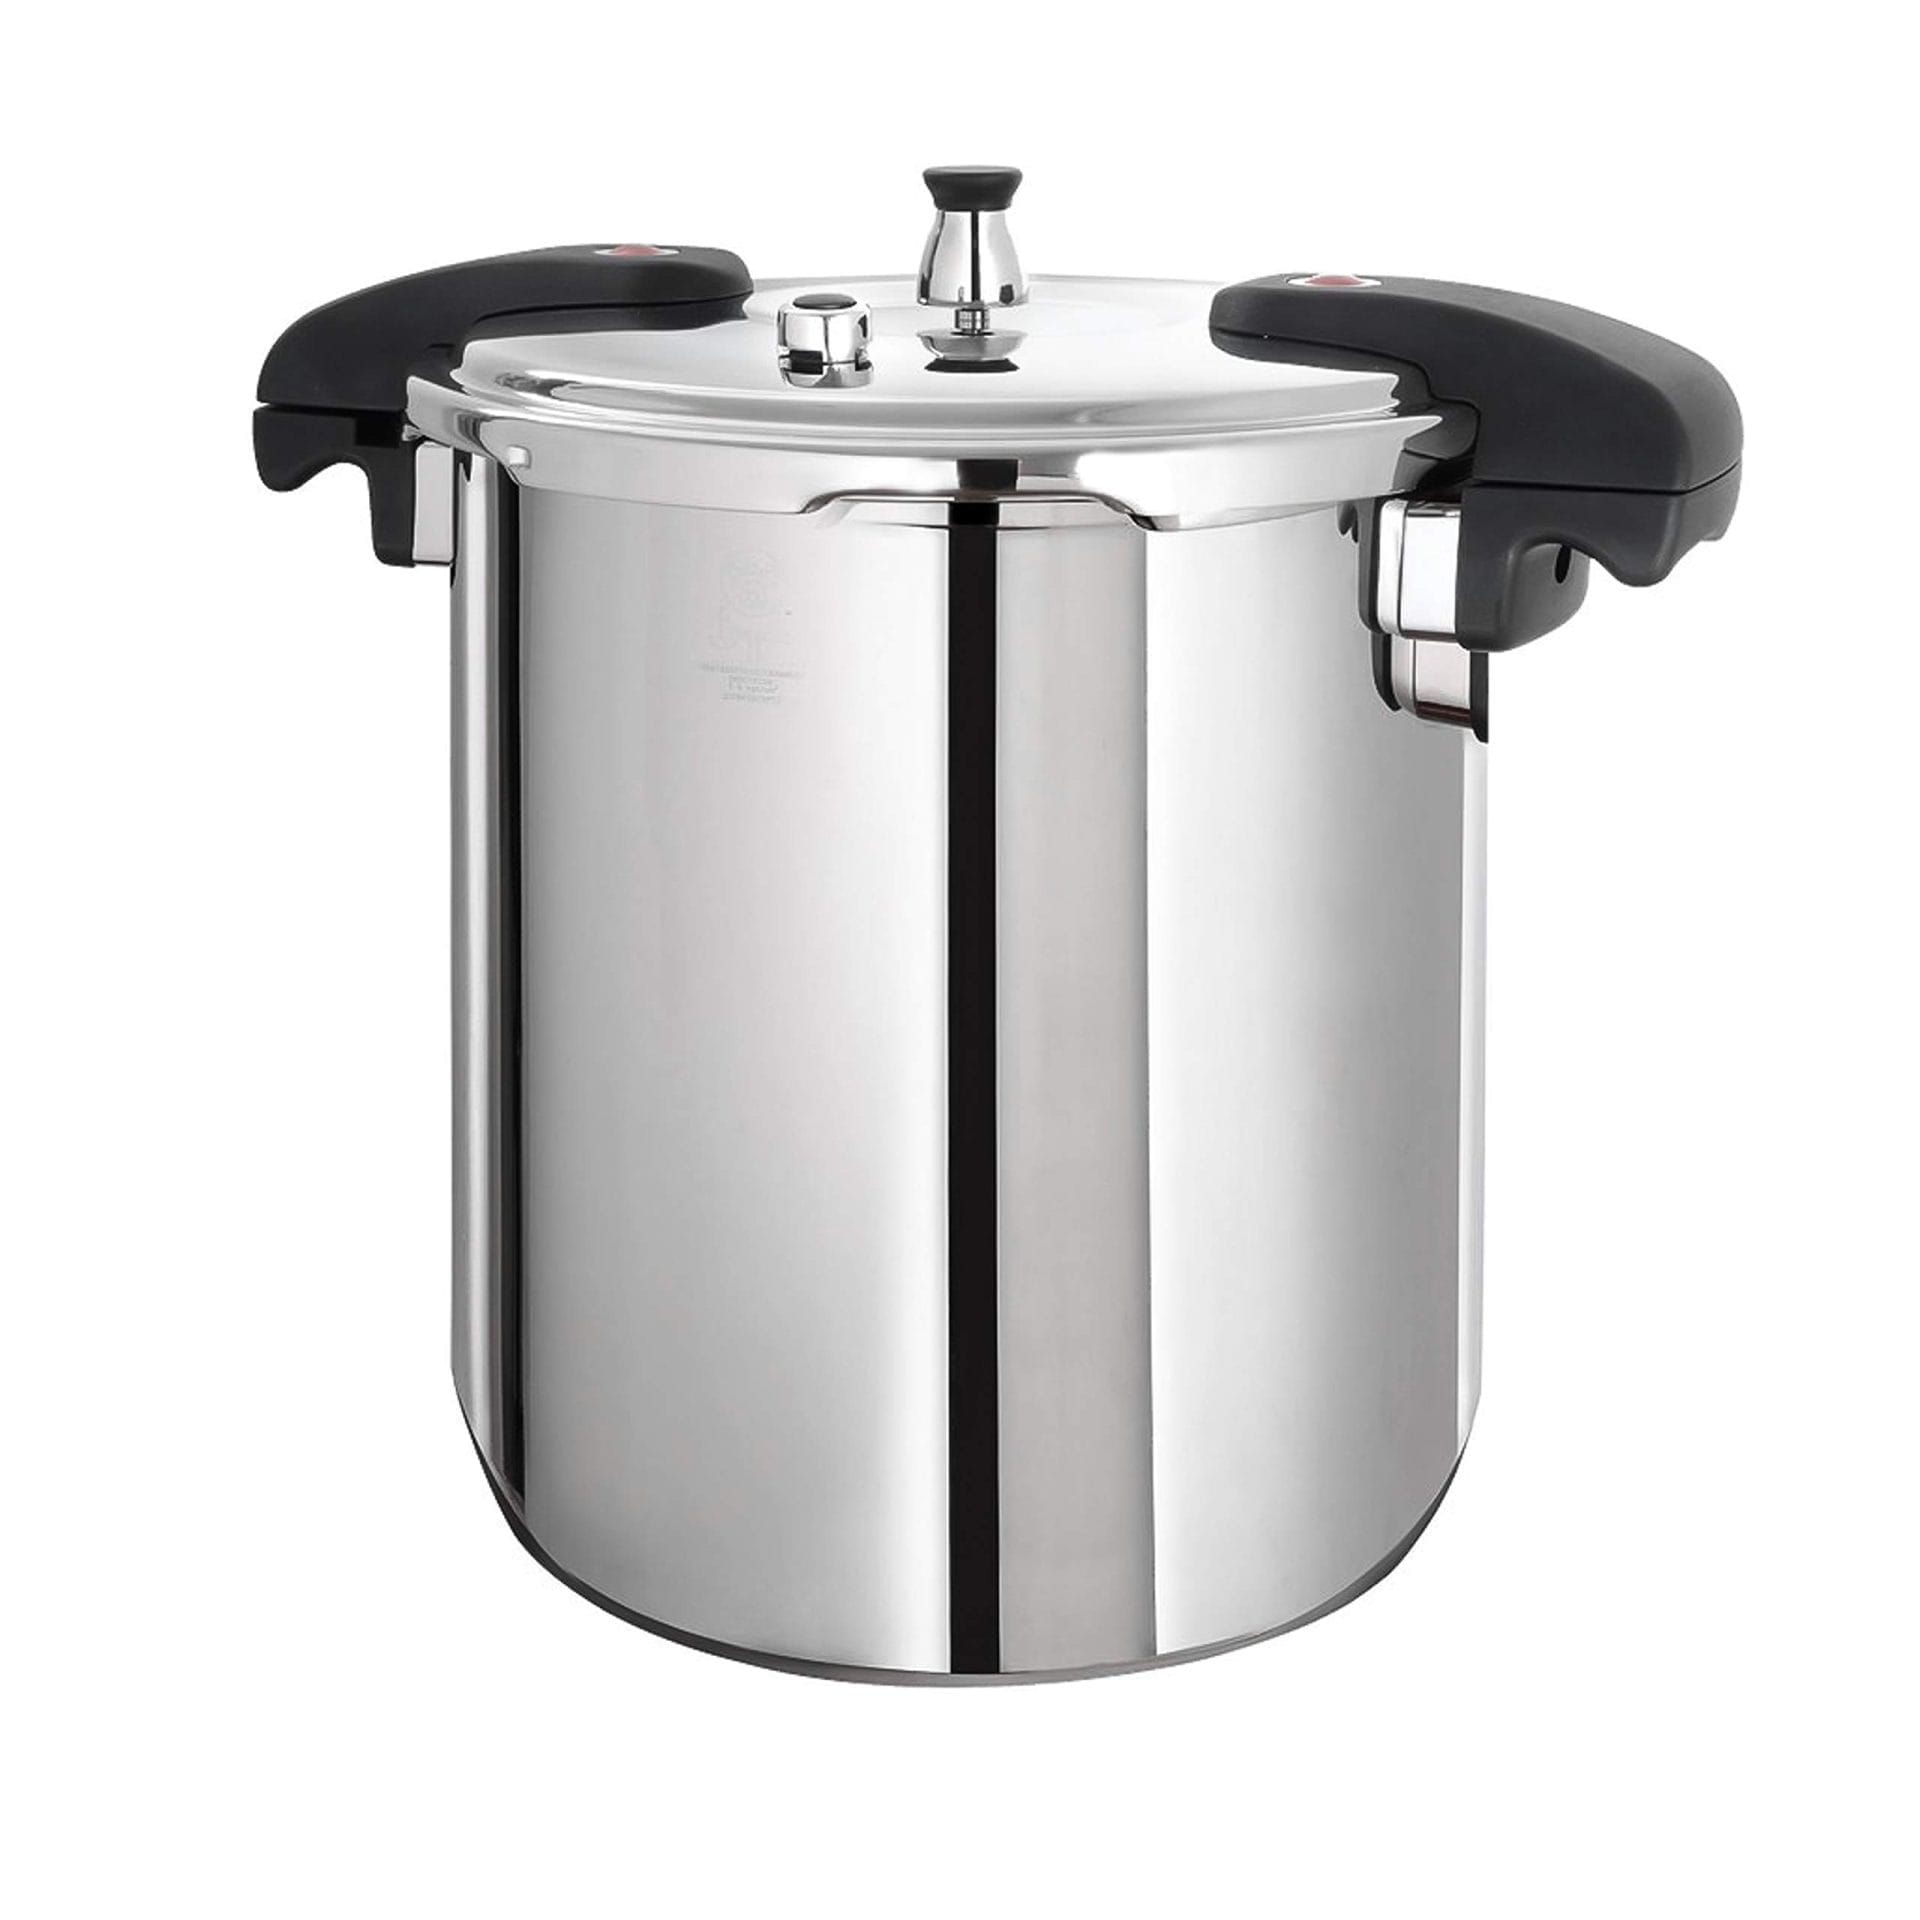 10 best stainless steel pressure cookers tested reviewed 1145 29 10